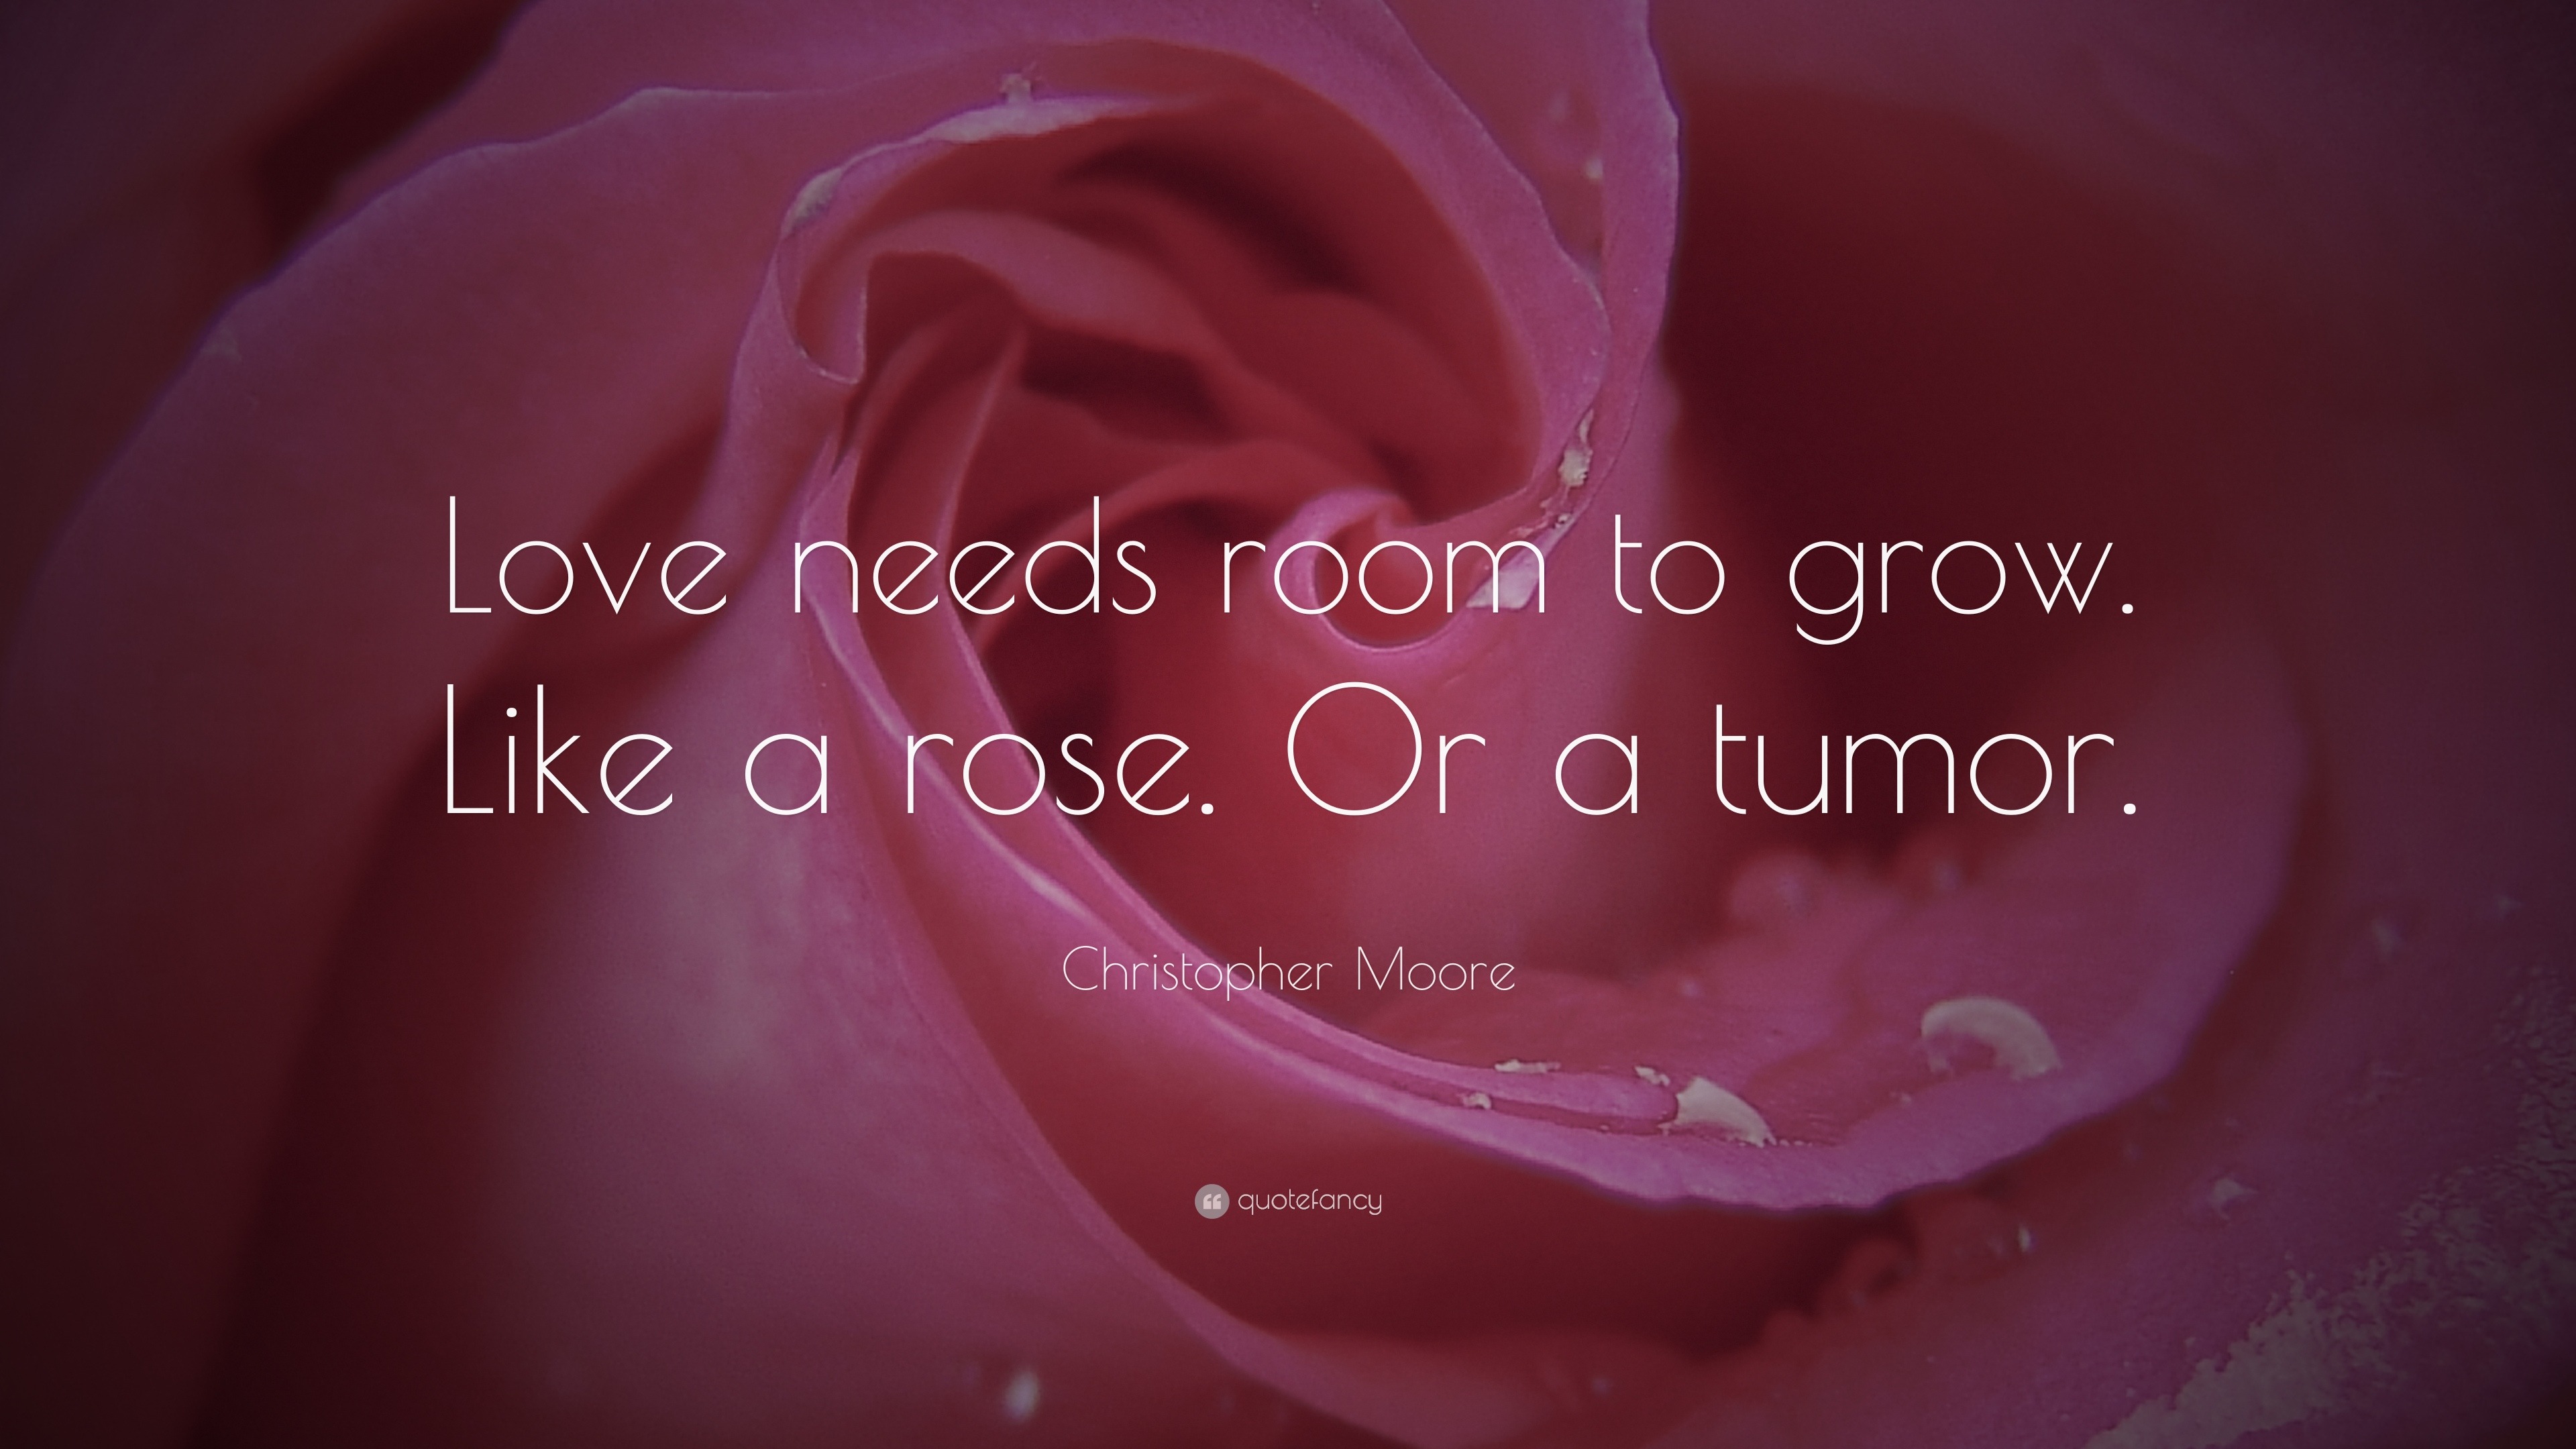 Christopher Moore Quote “Love needs room to grow Like a rose Or